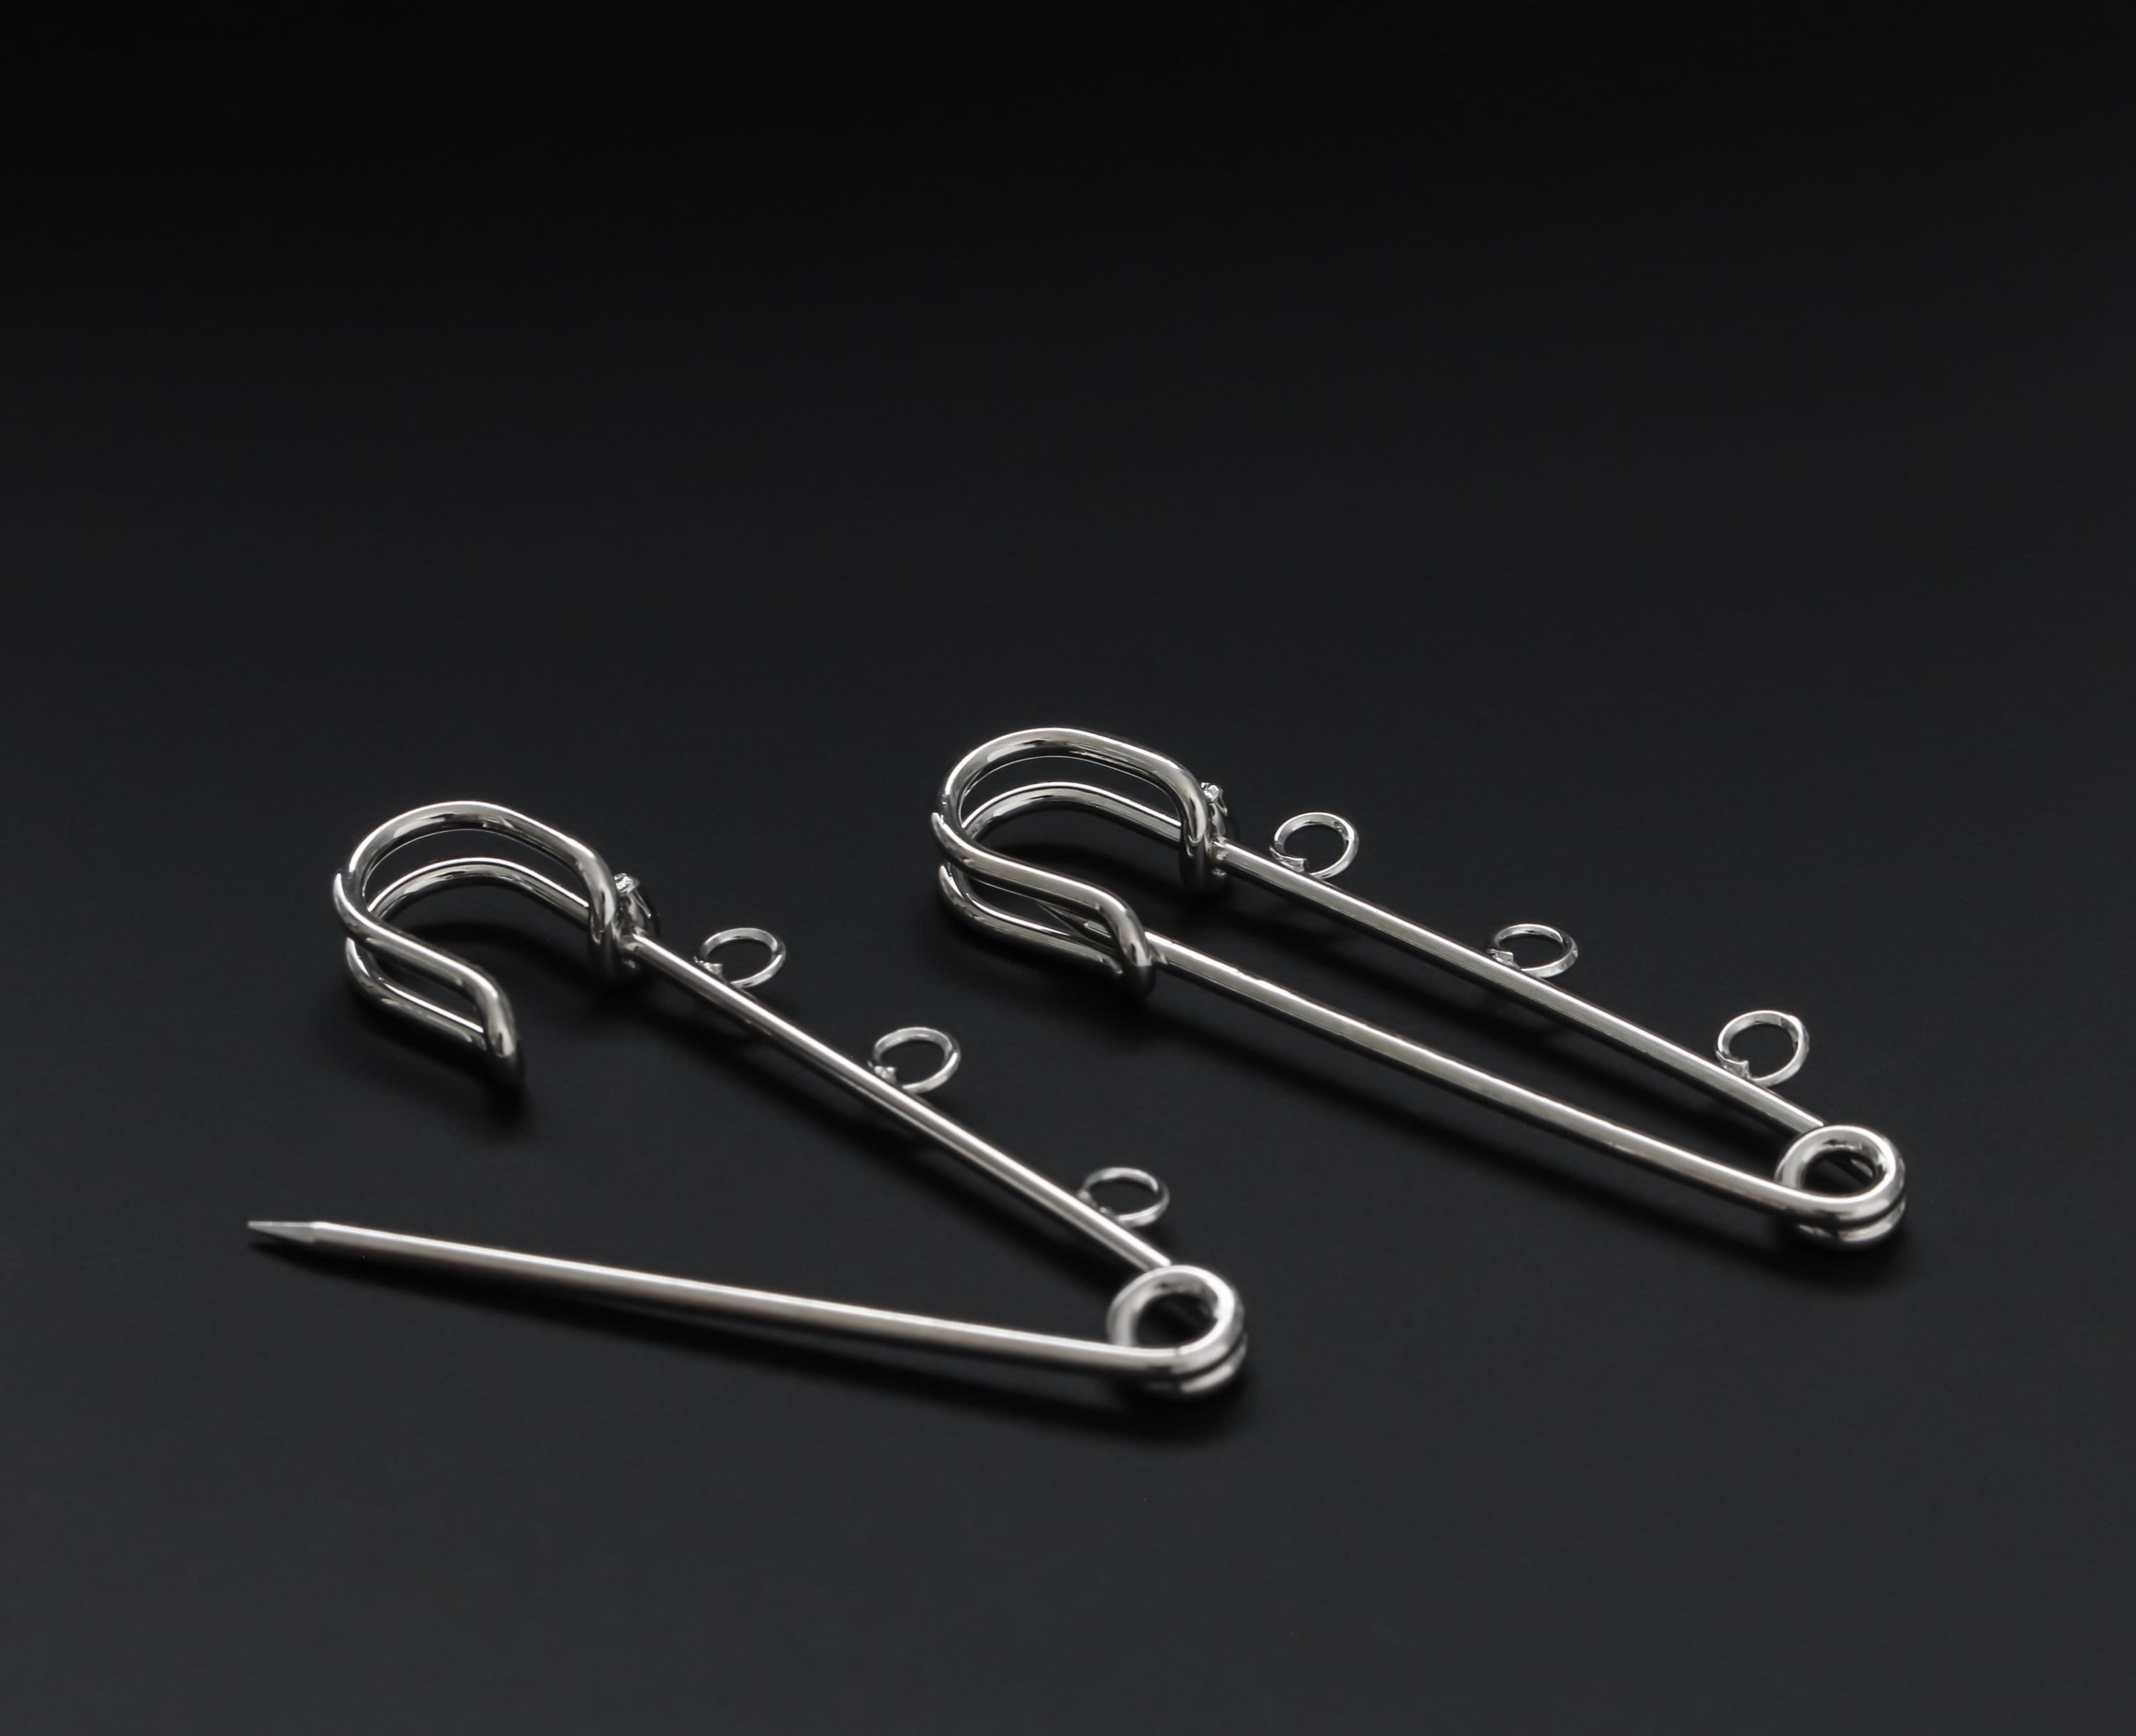 Coilless Safety Pins, 3/4 Inch, Silver-Tone Metal (100 Pieces)